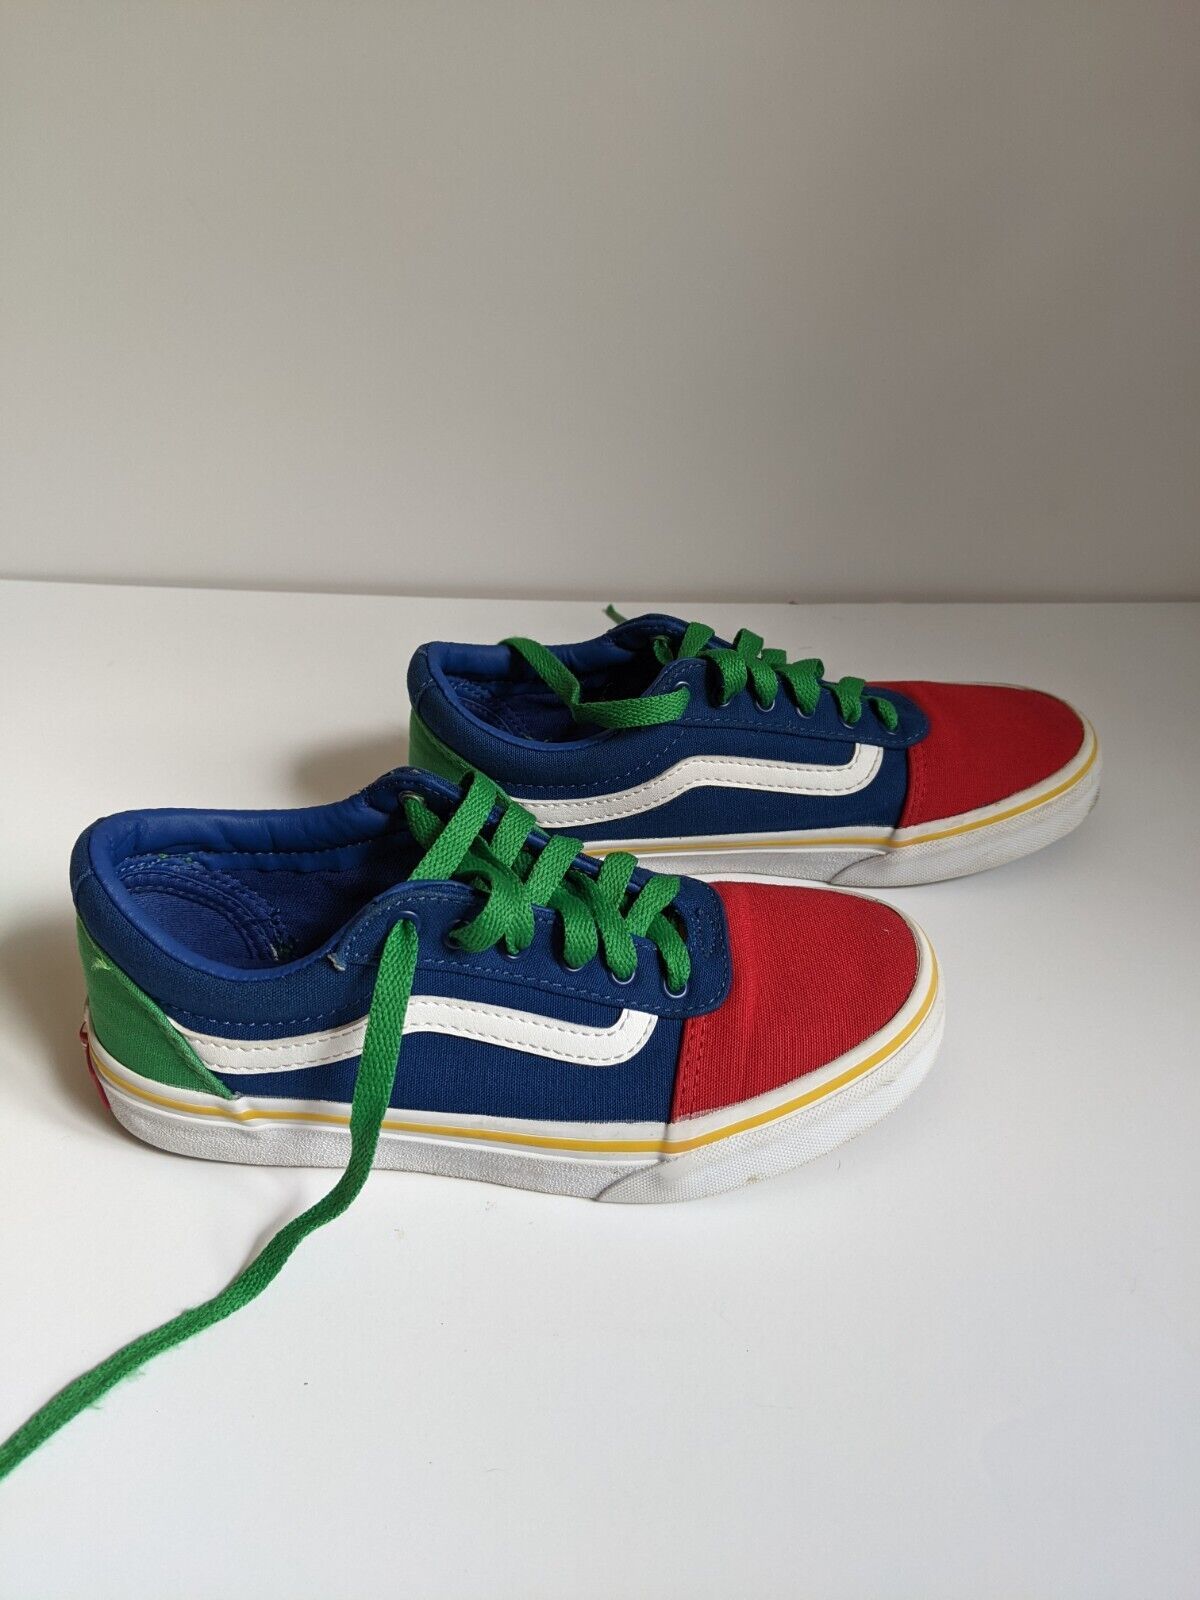 Vans Old Skool Colorblock Little Kids Youth Size 3 Lace Up Athletic Skate Shoes - $12.19